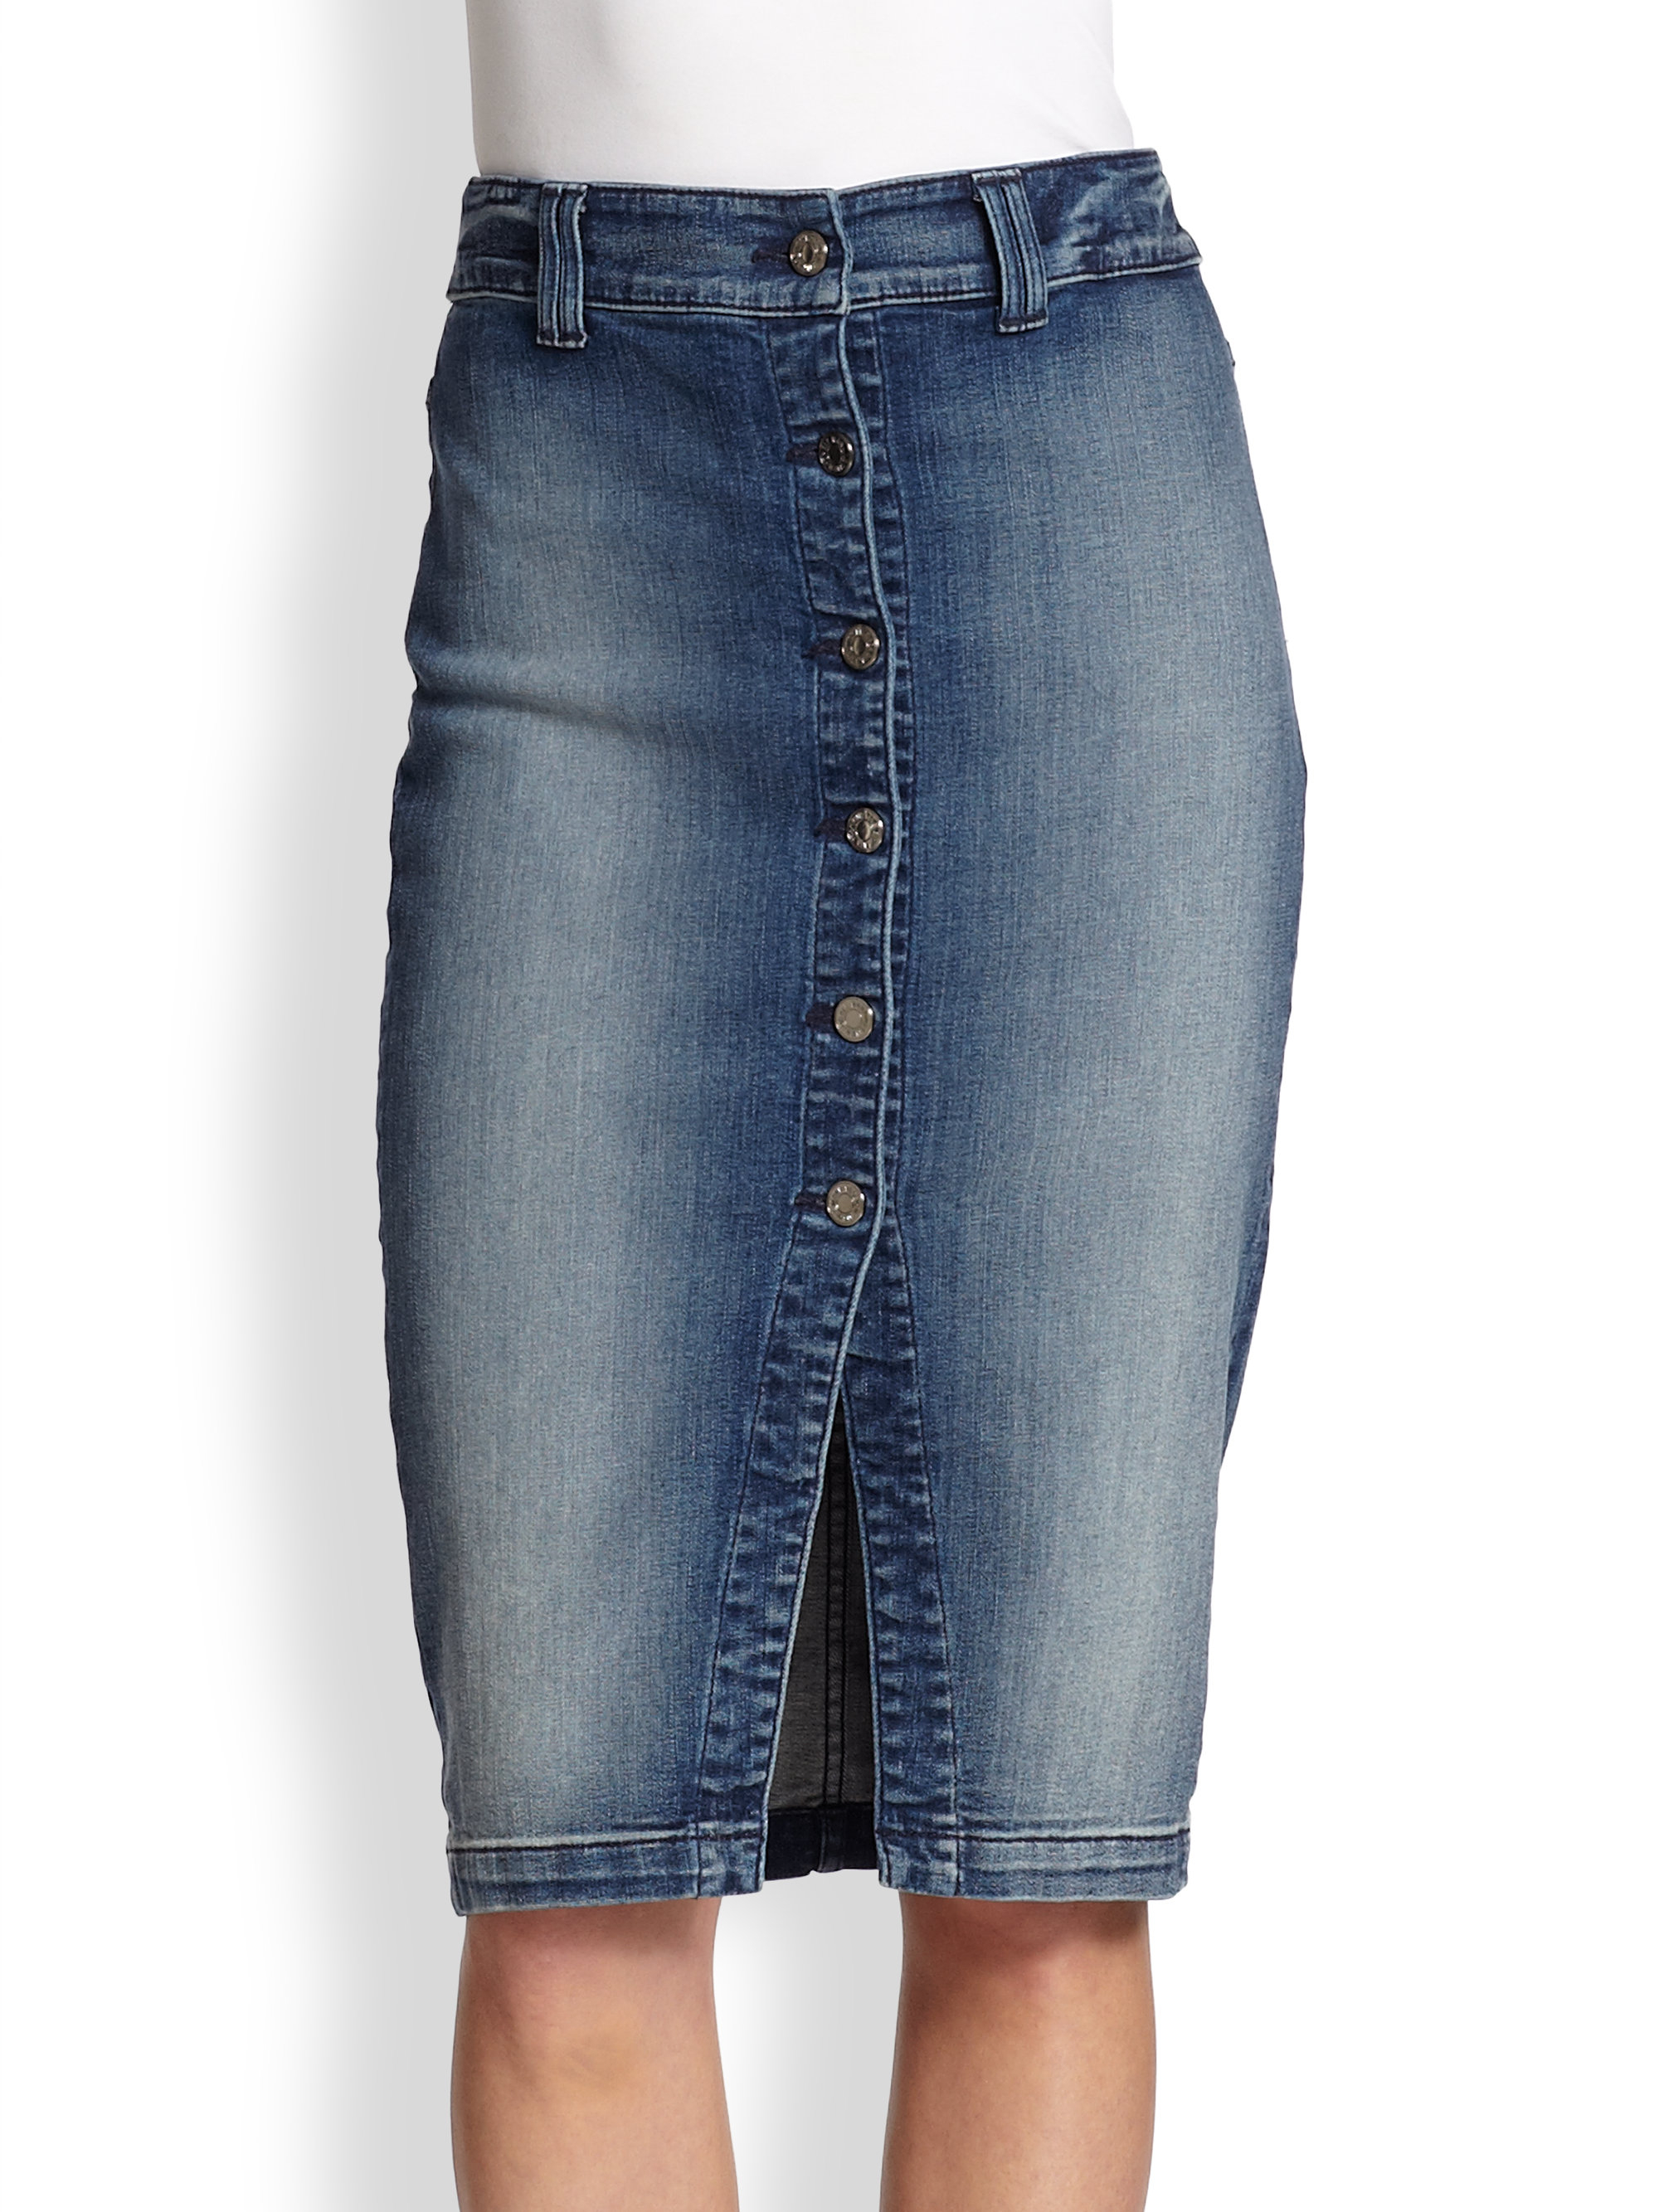 7 For All Mankind Buttonfront Stretch Denim Pencil Skirt in Blue - Lyst